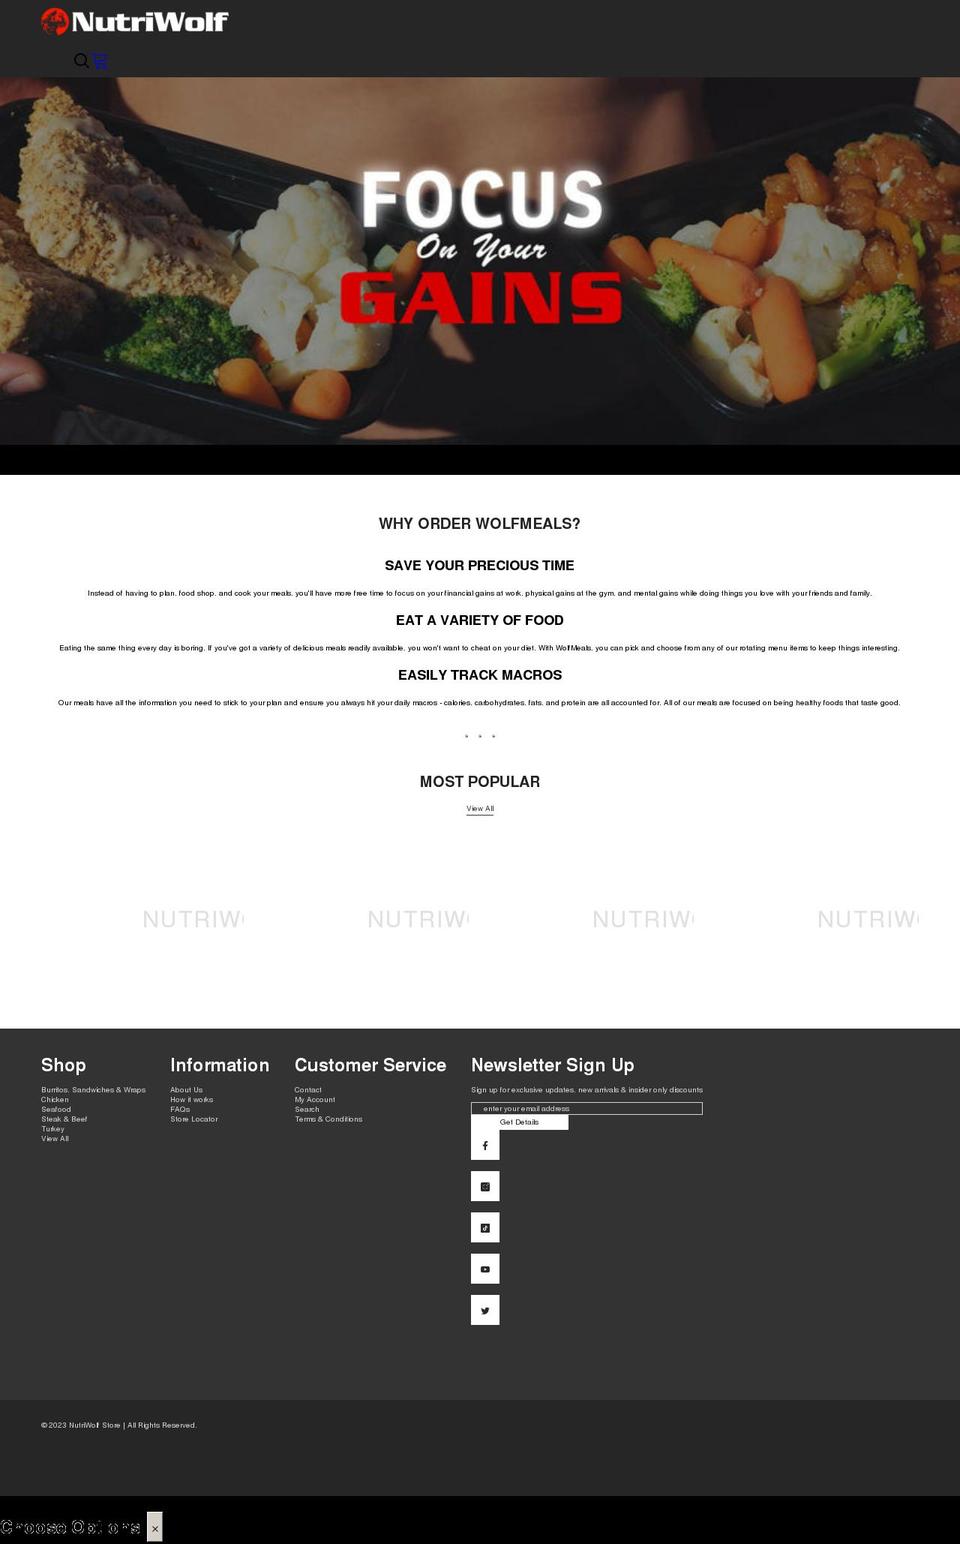 Broccoli Shopify theme site example wolfmeals.com